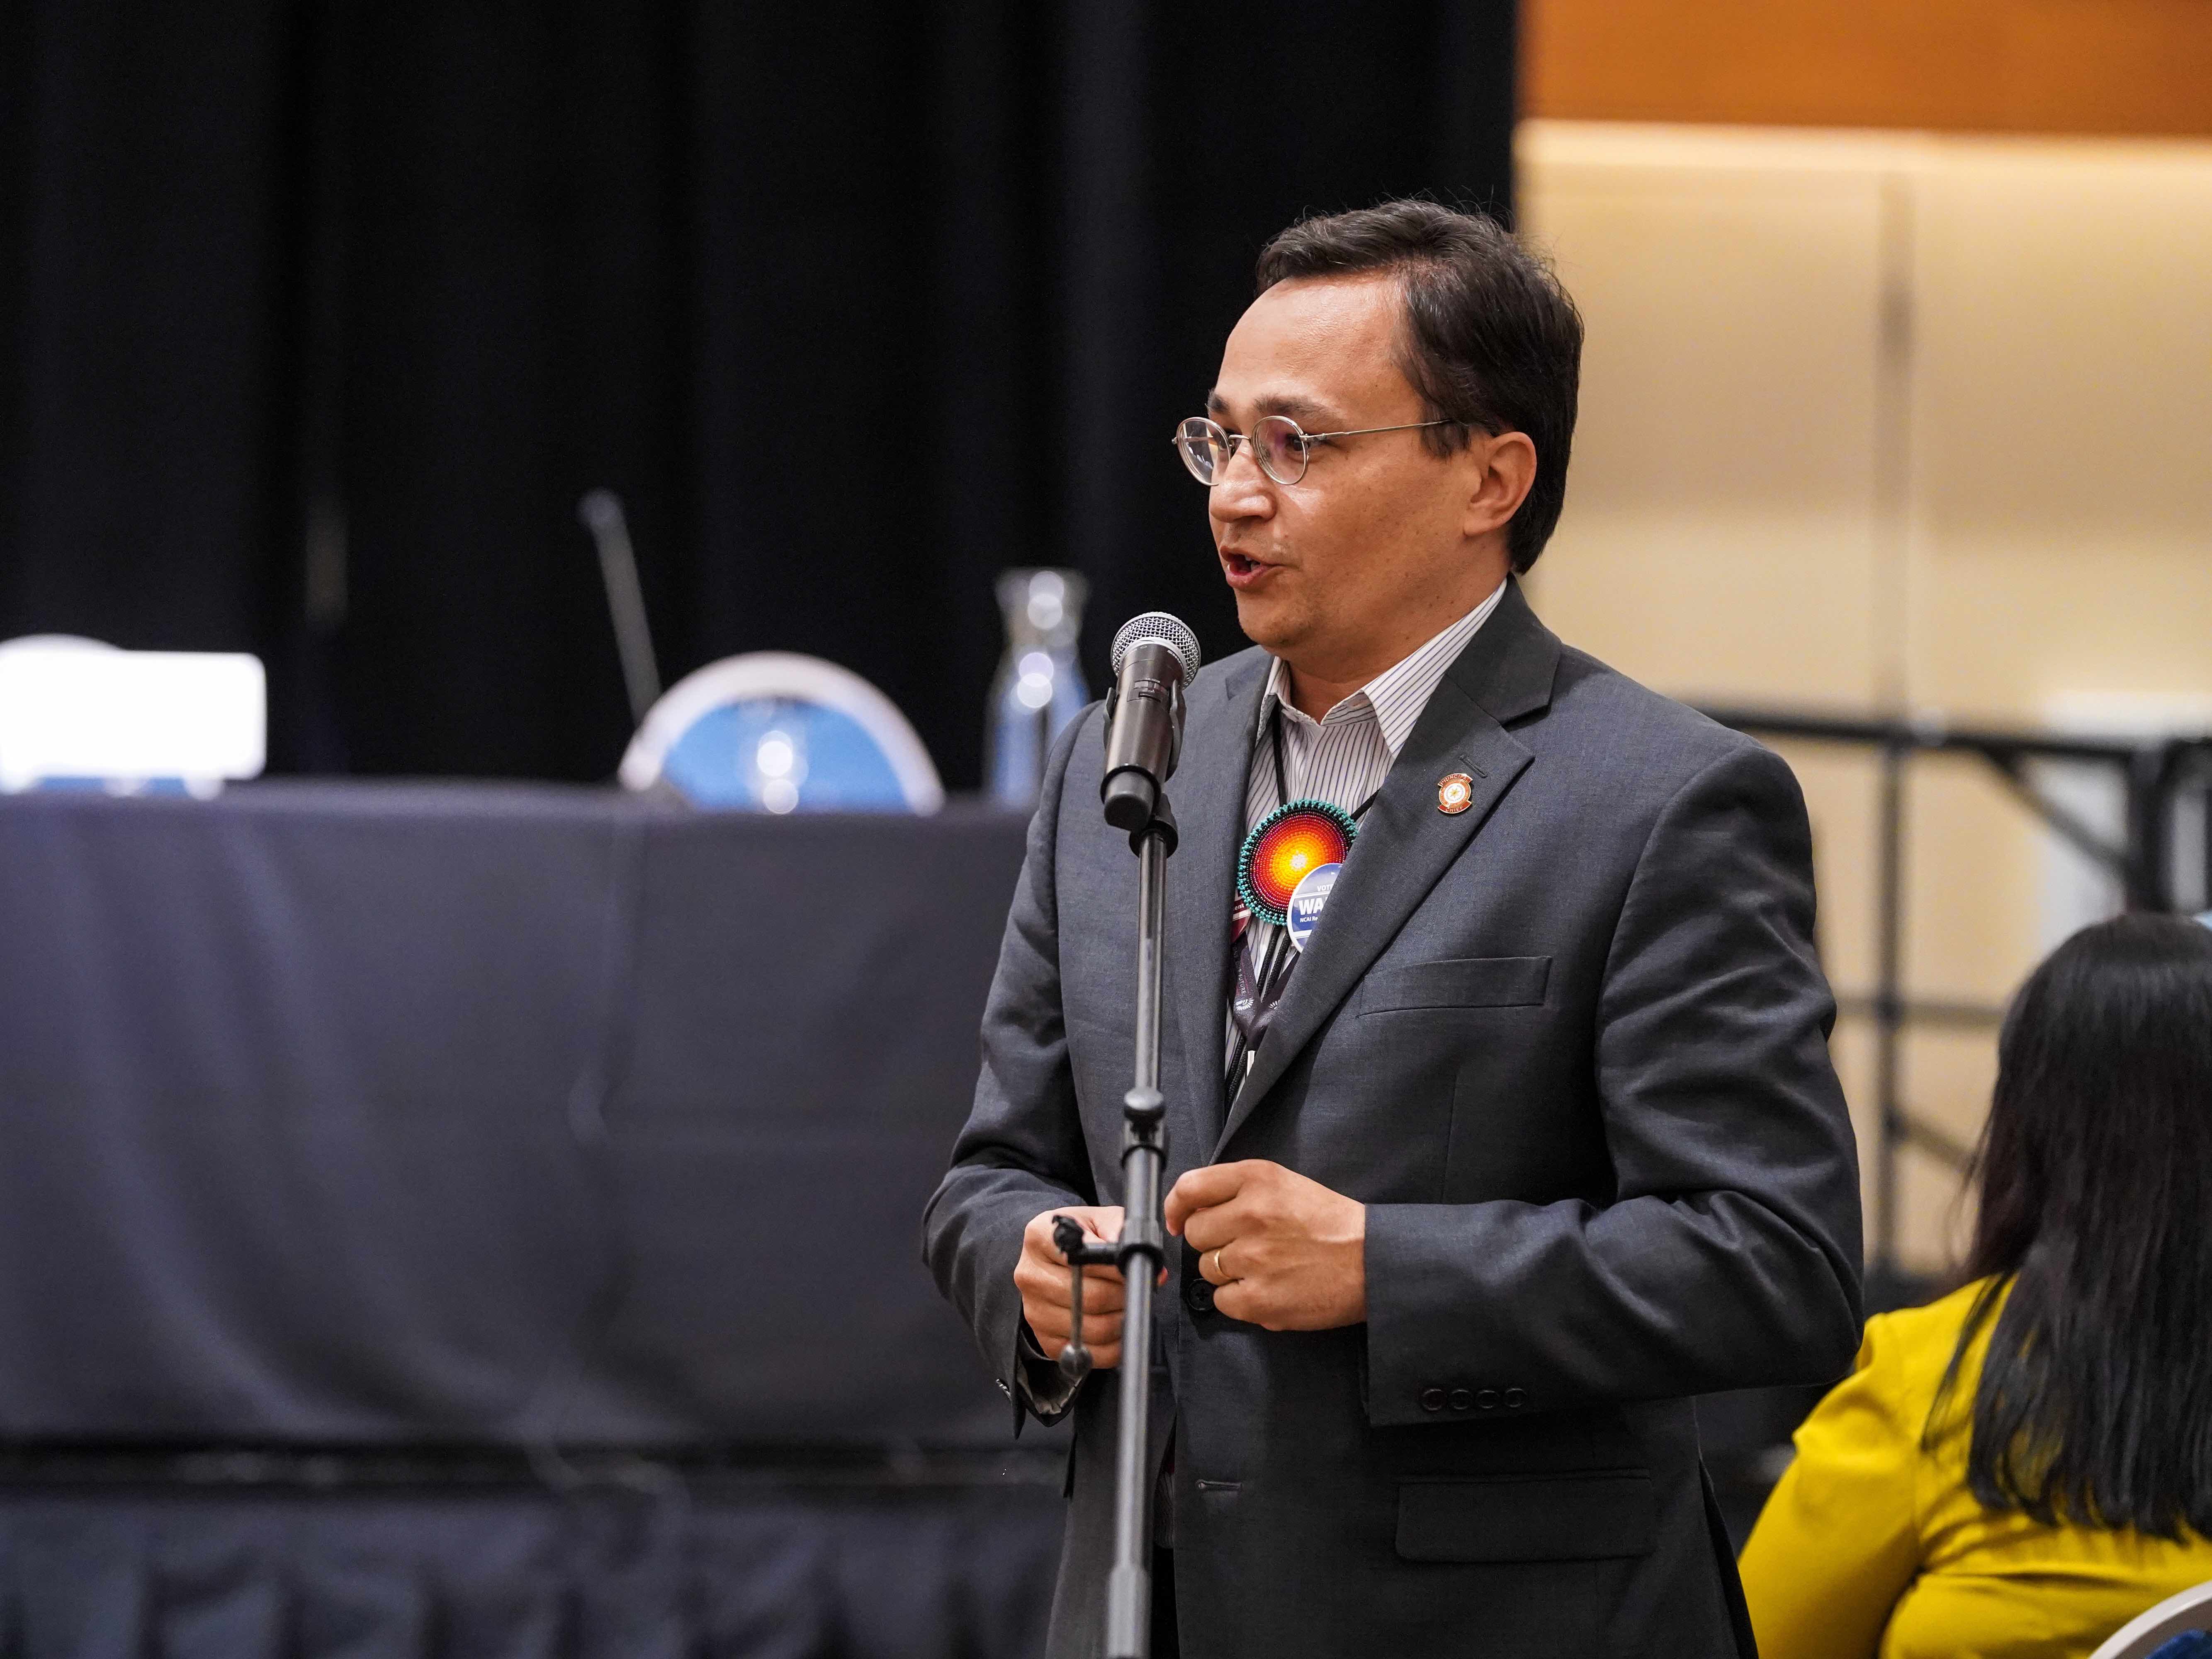 Chuck Hoskin: Inter-Tribal Council utilizing technology for meeting and business